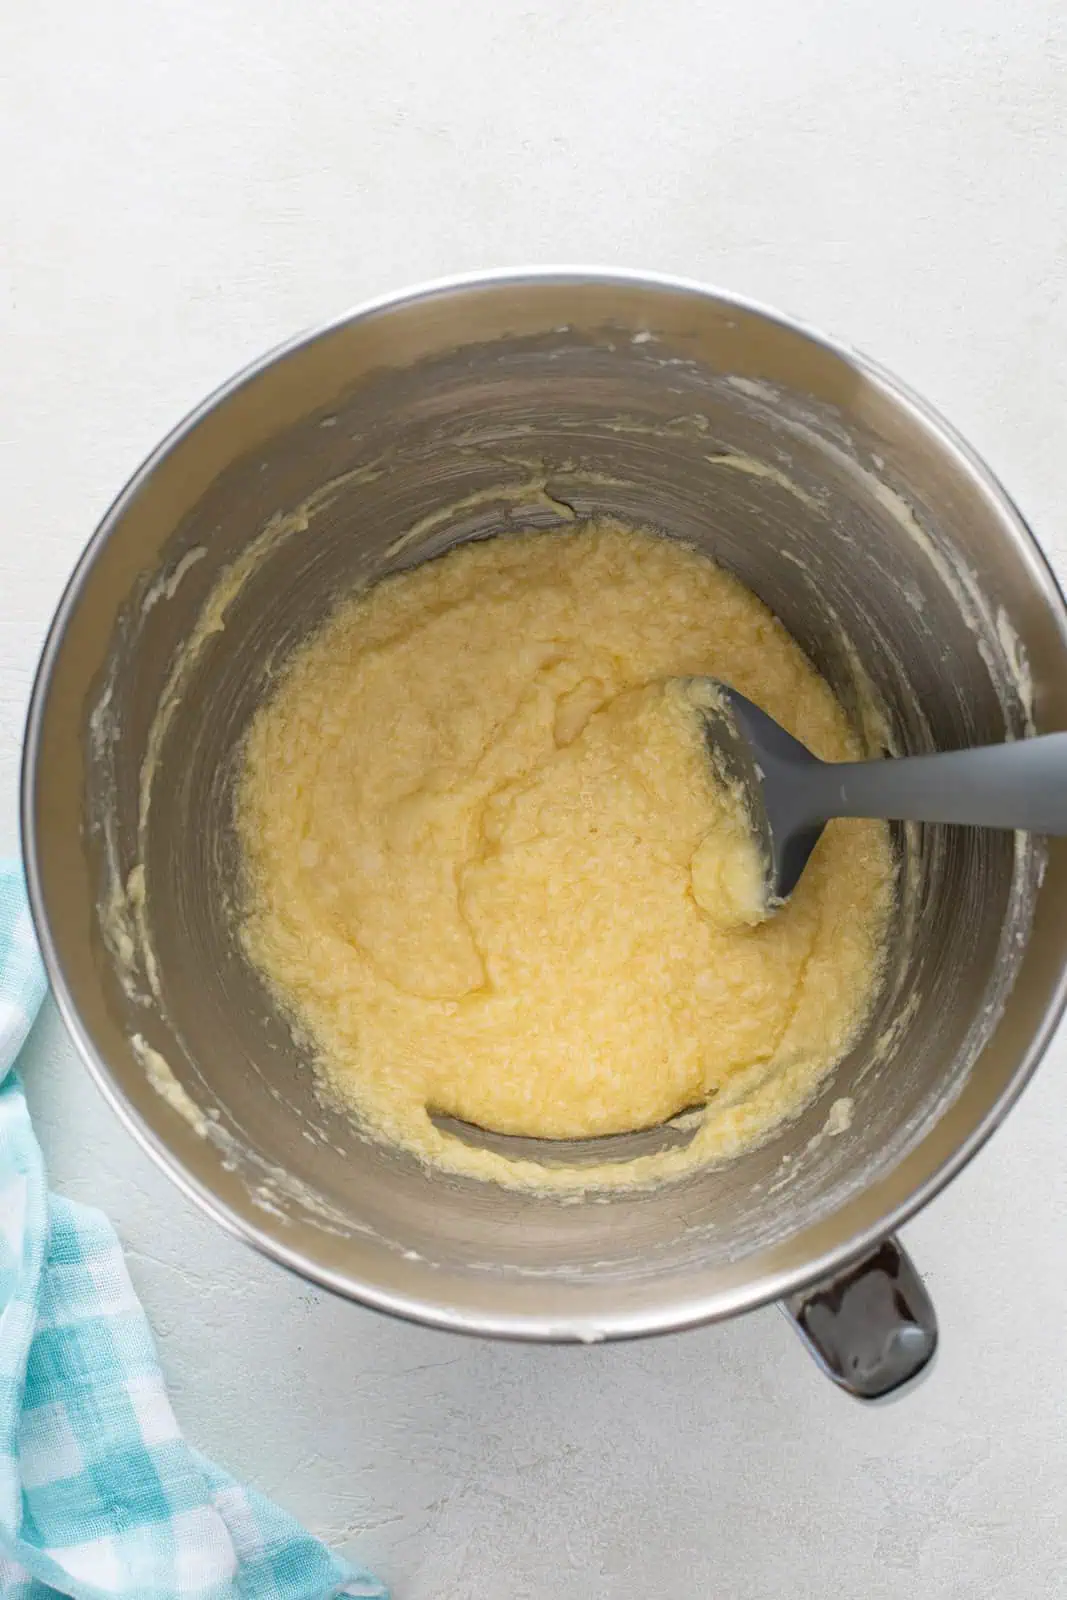 Eggs added to creamed butter and sugar in a metal bowl.